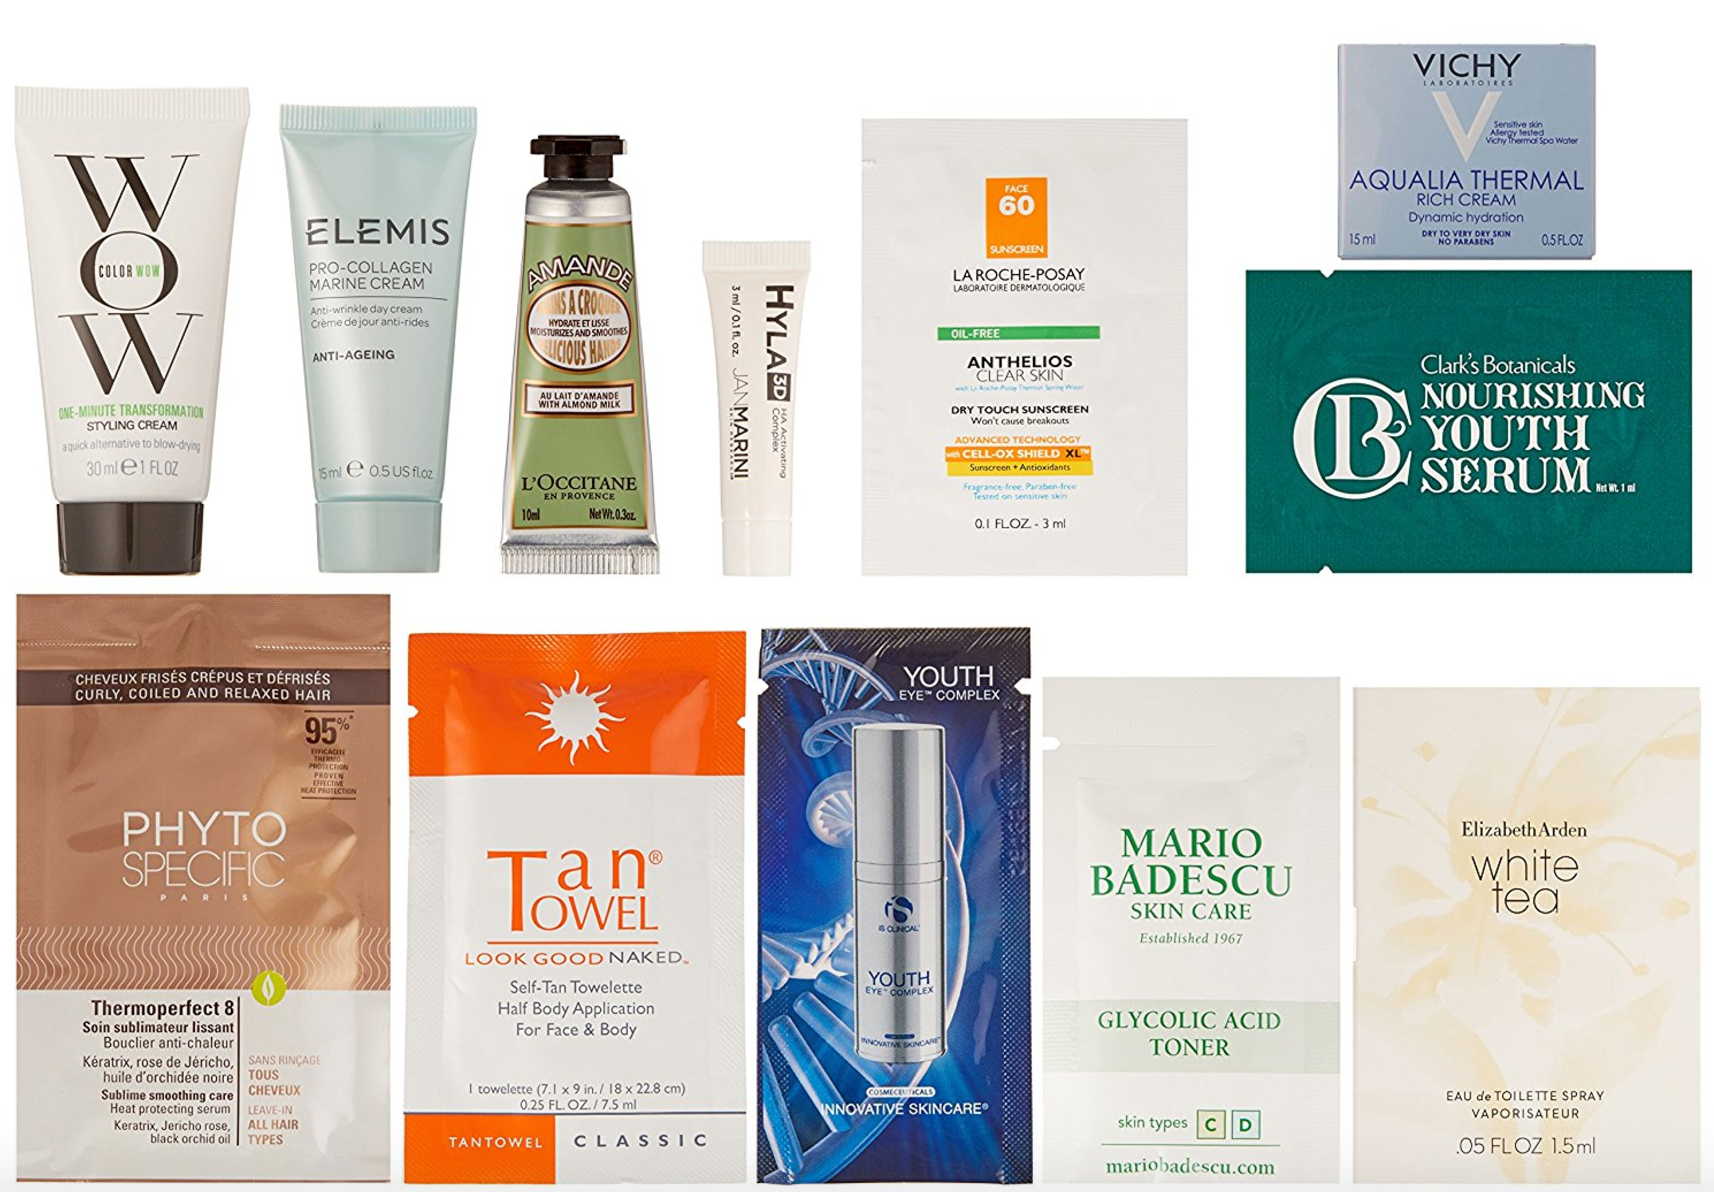 Luxury Women's Beauty Box, 10 or more samples ($19.99 credit on select products with purchase)